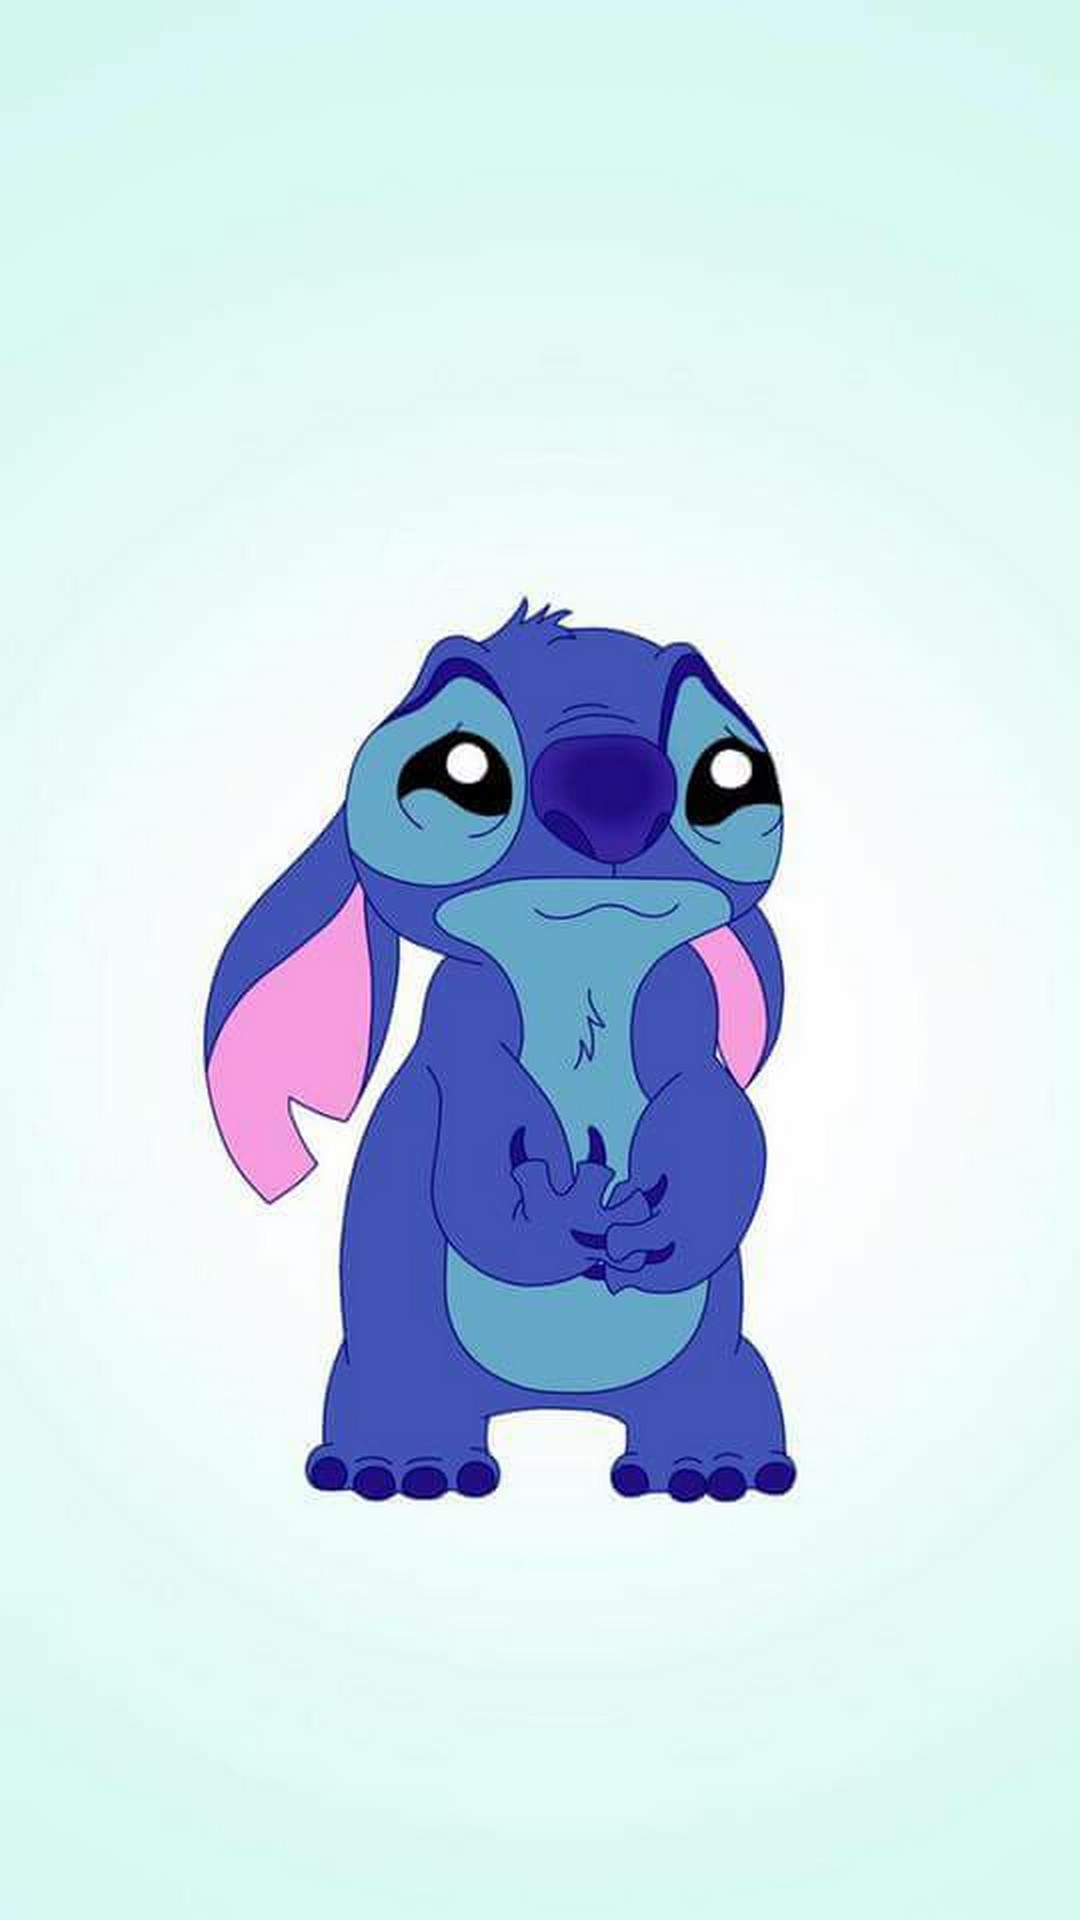 Stitch Wallpaper For Mobile Android Cute